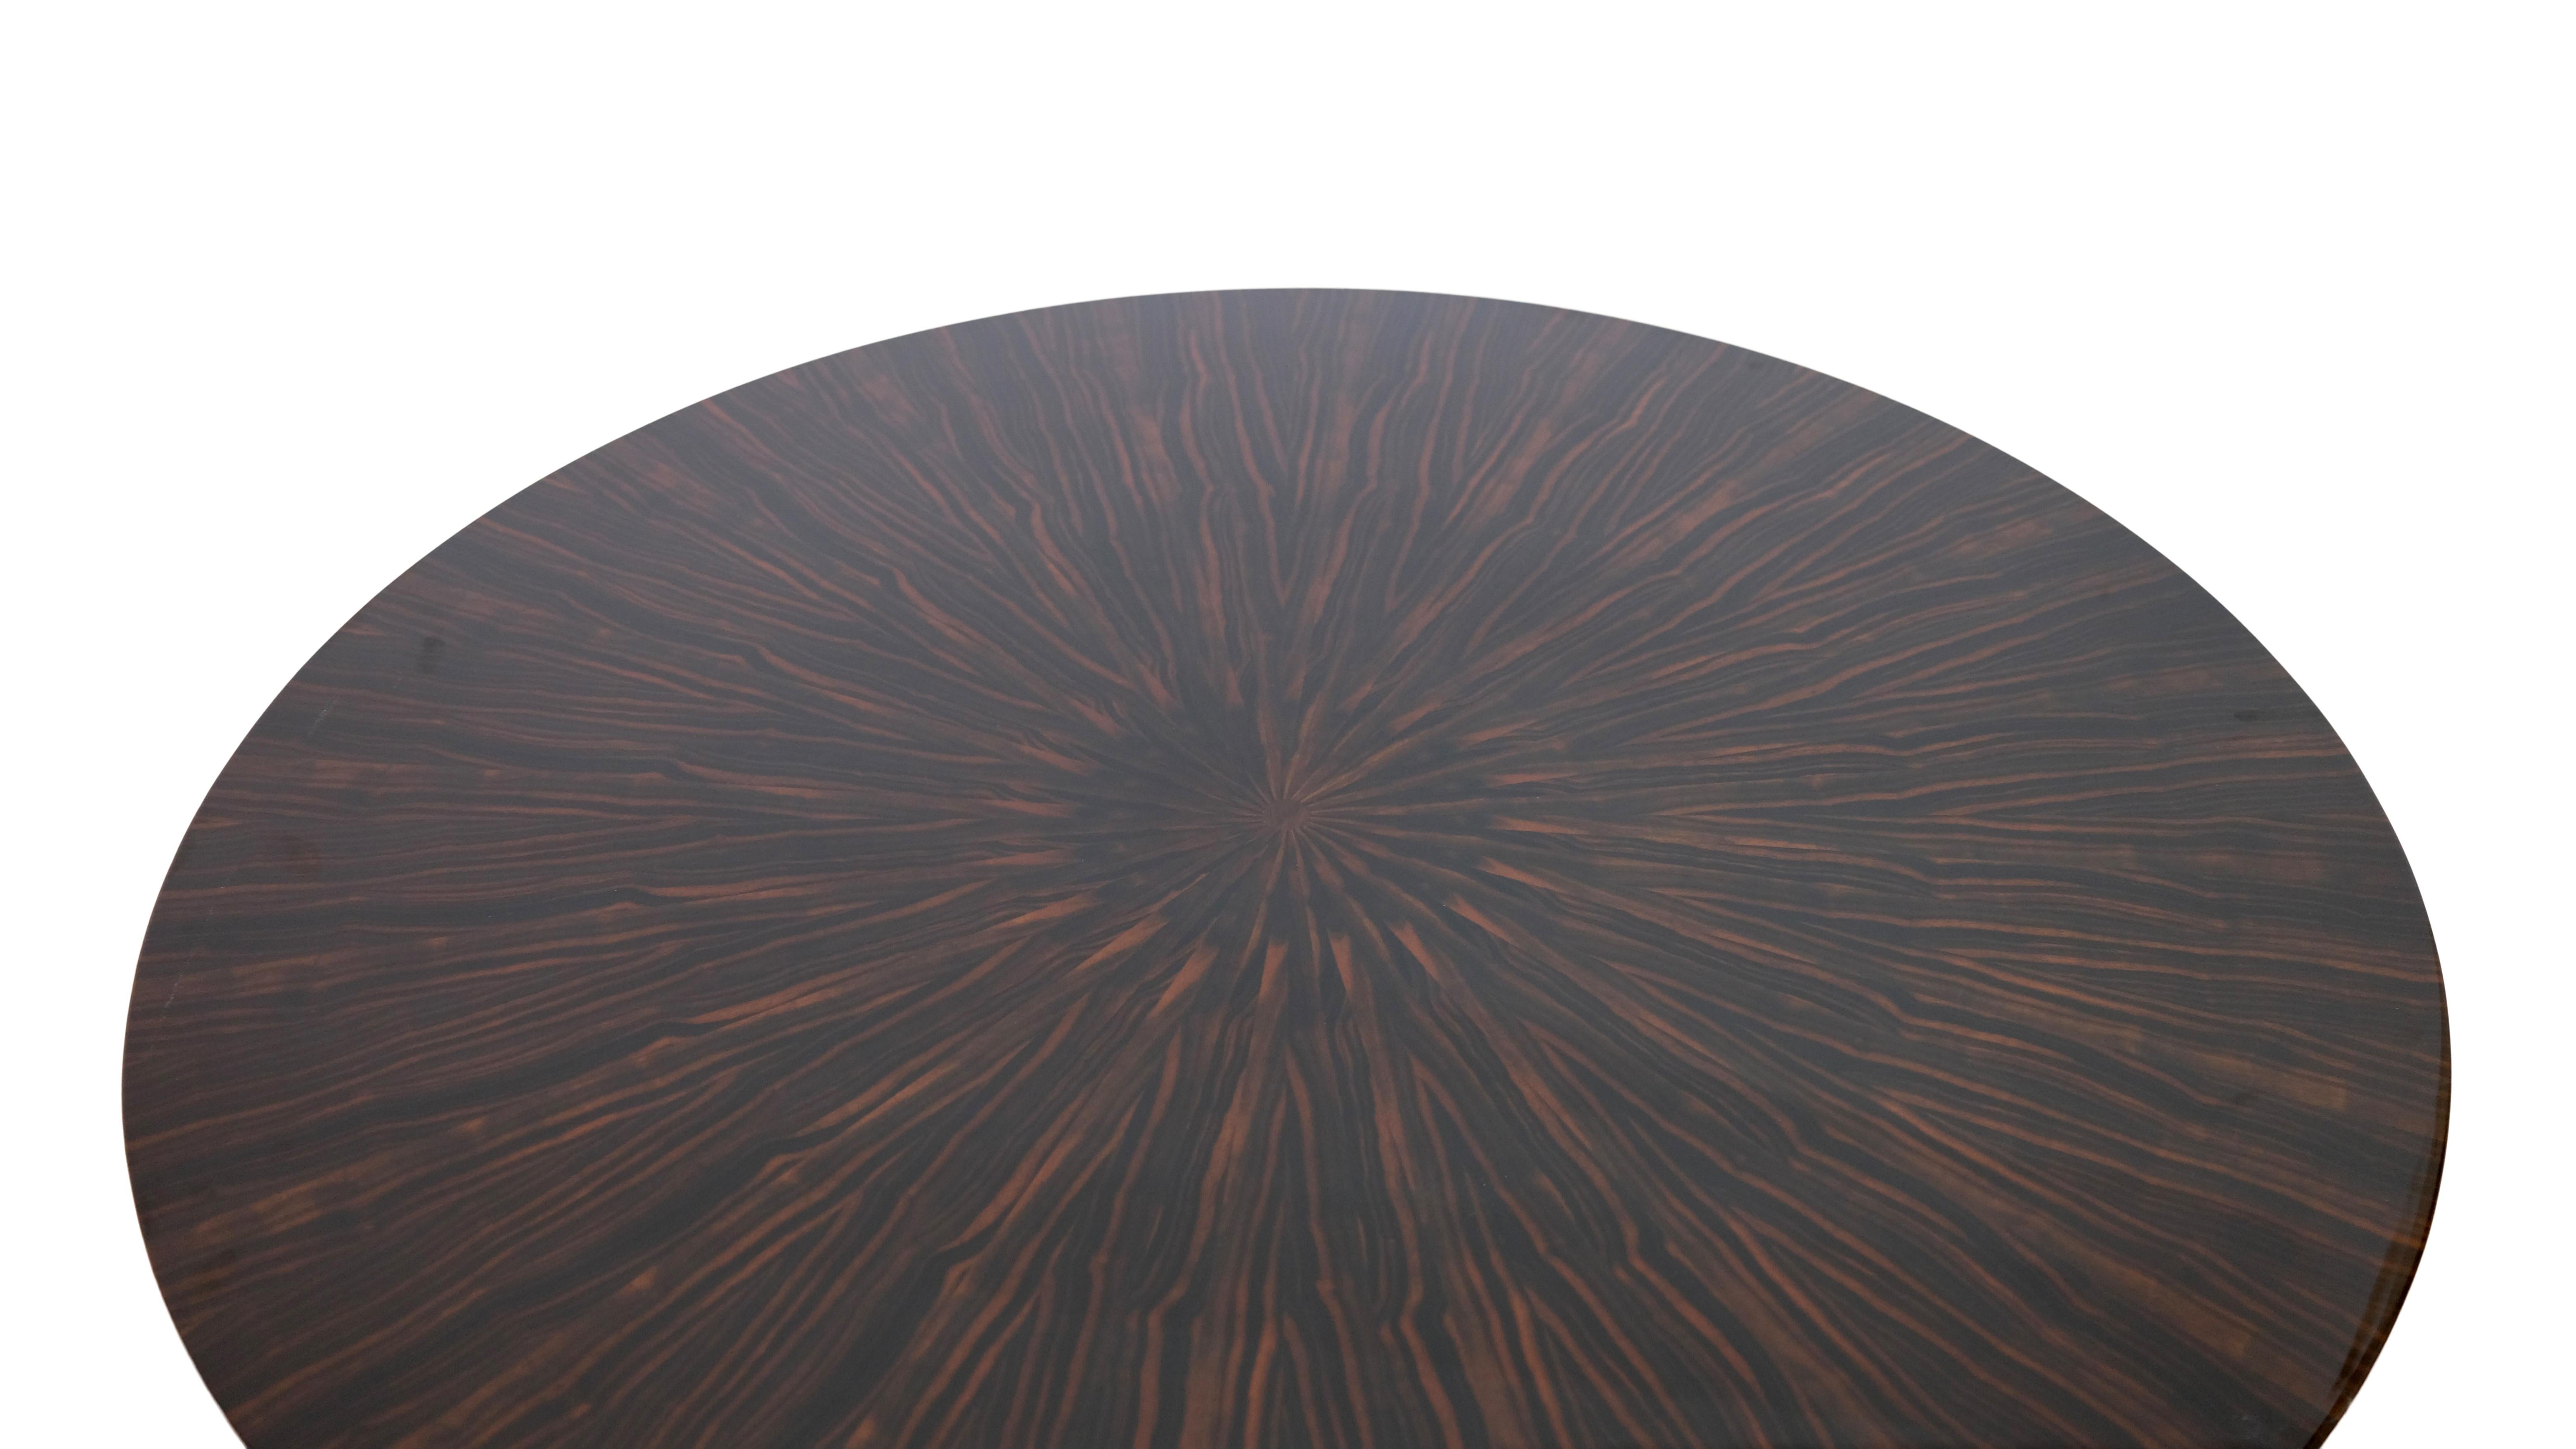 Art Deco style round dining table
Macassar, high gloss lacquer
Black lacquer

Manufacture in the style of art deco, 2000s

Dimensions:
Diameter: 119 cm
Height: 75 cm.